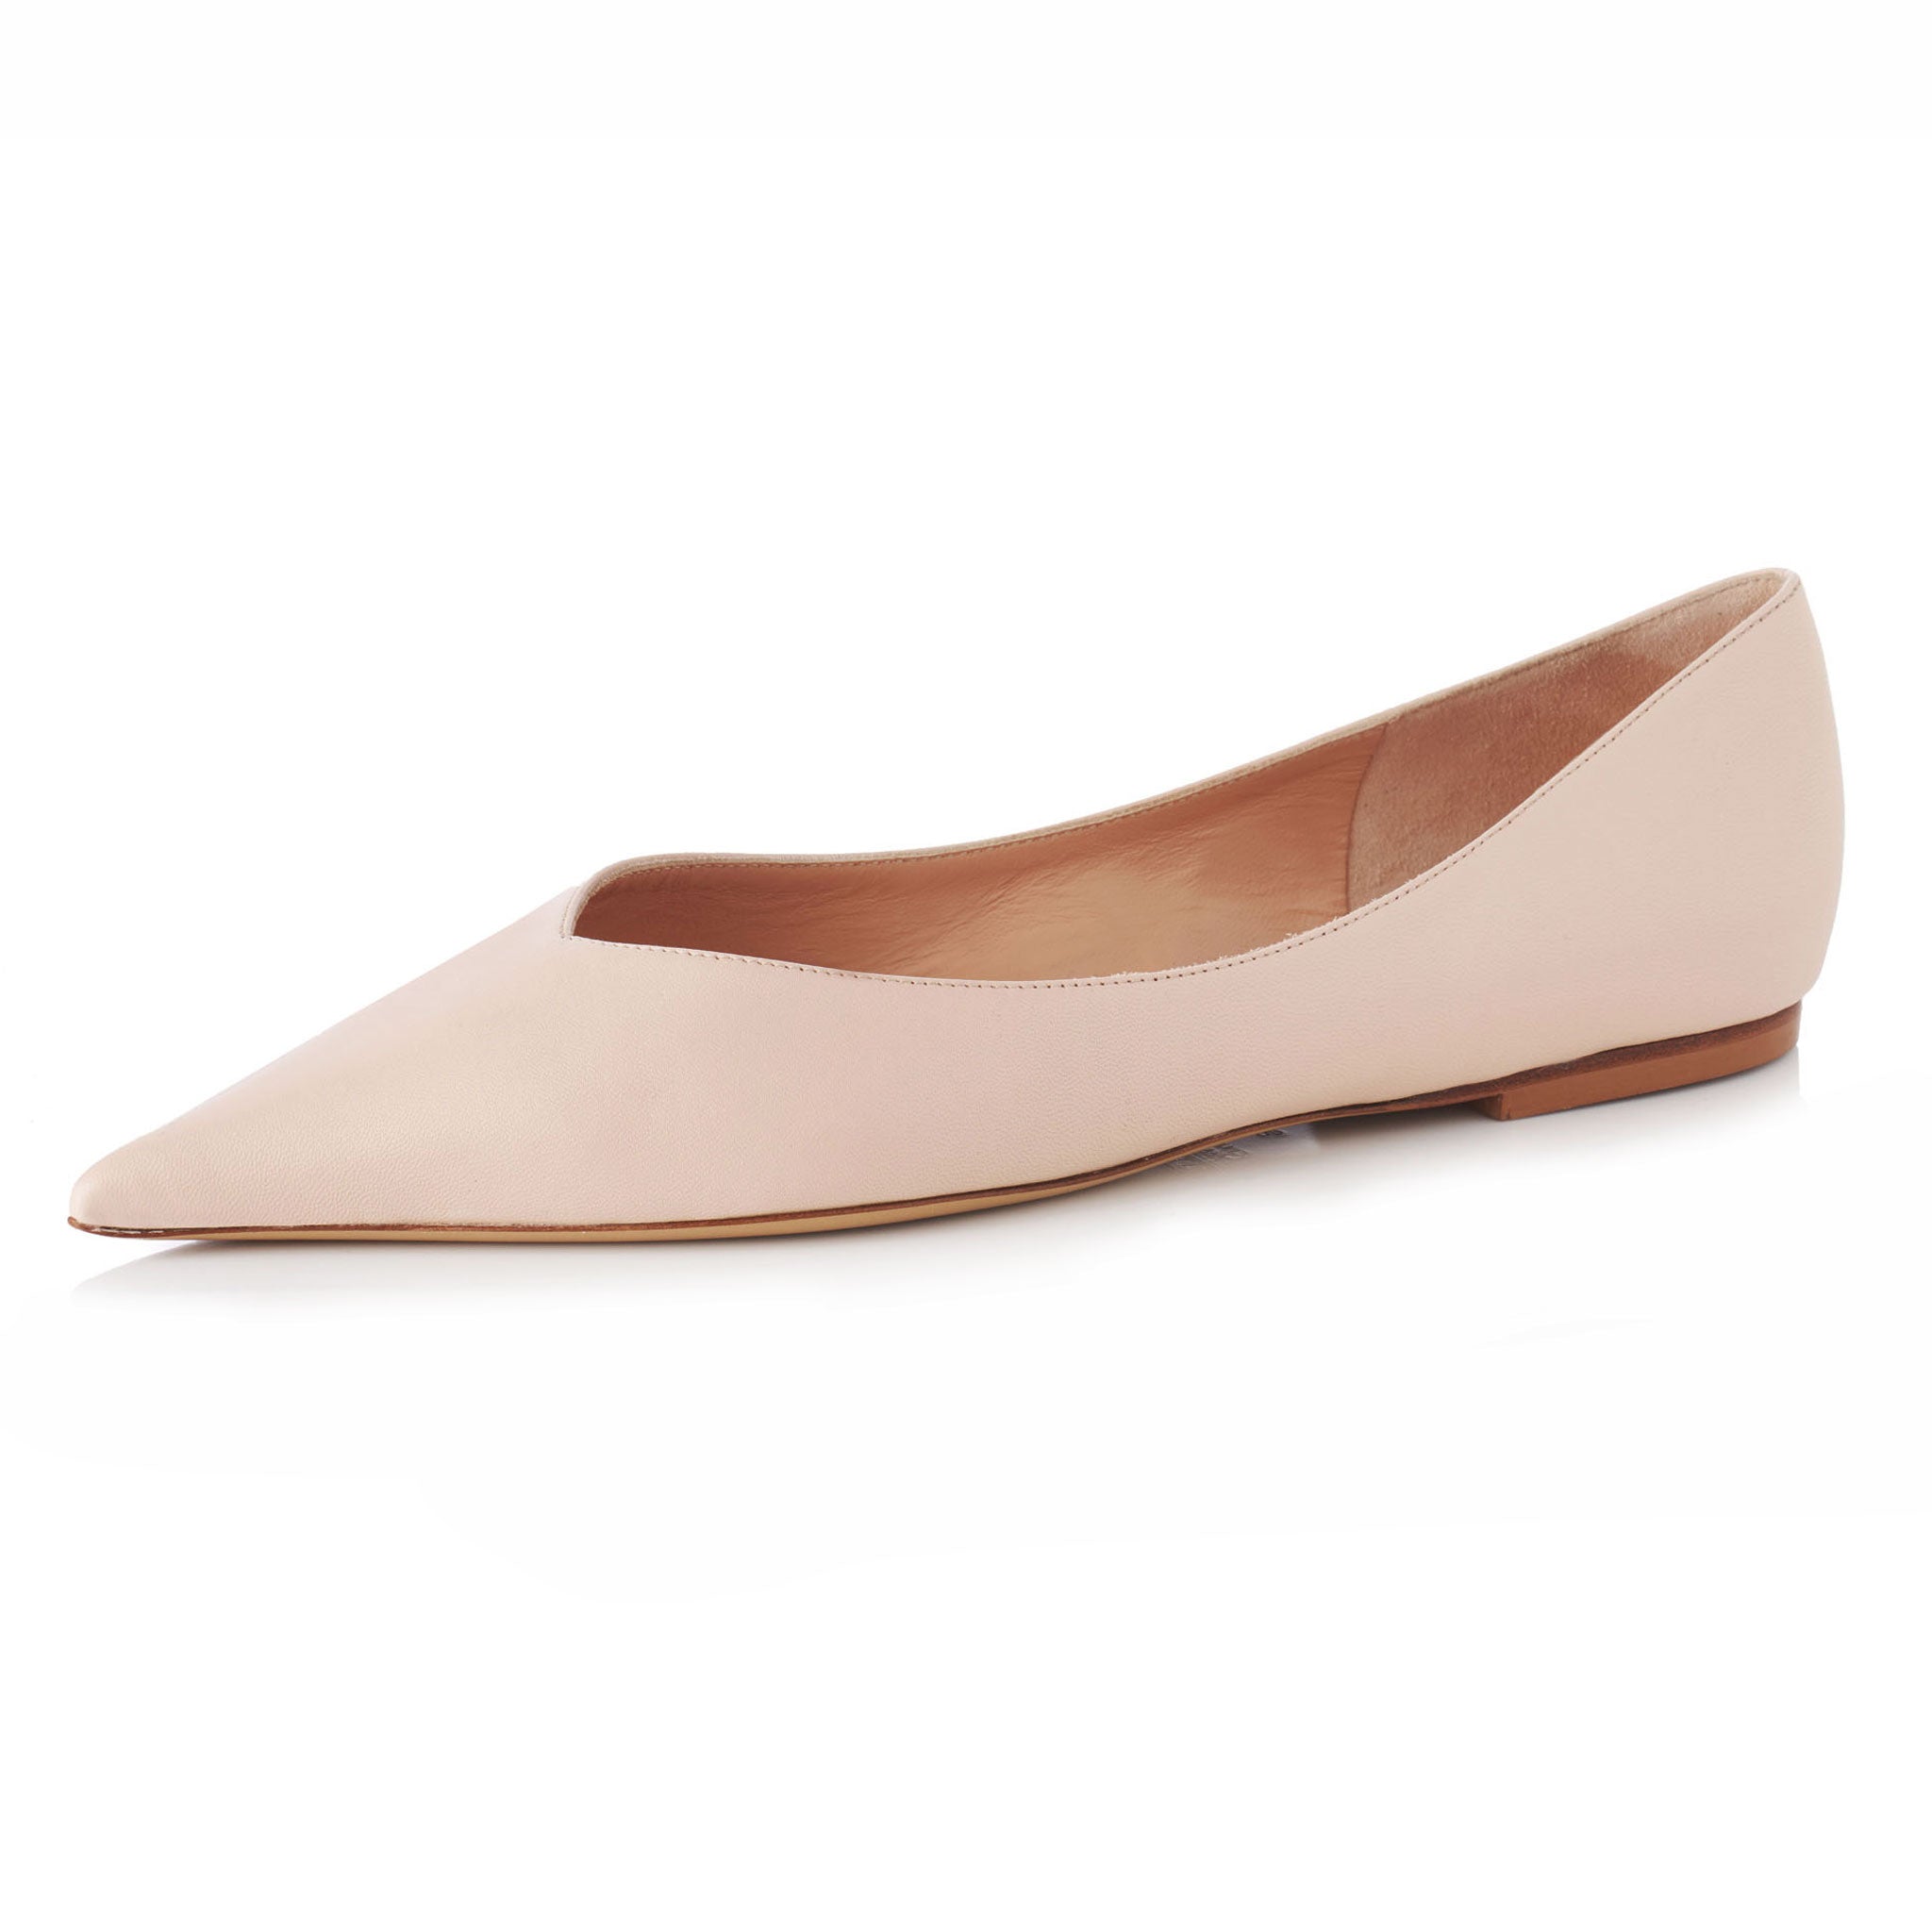 pointy flat shoes slip on with leather upper and sole in perfect nude color